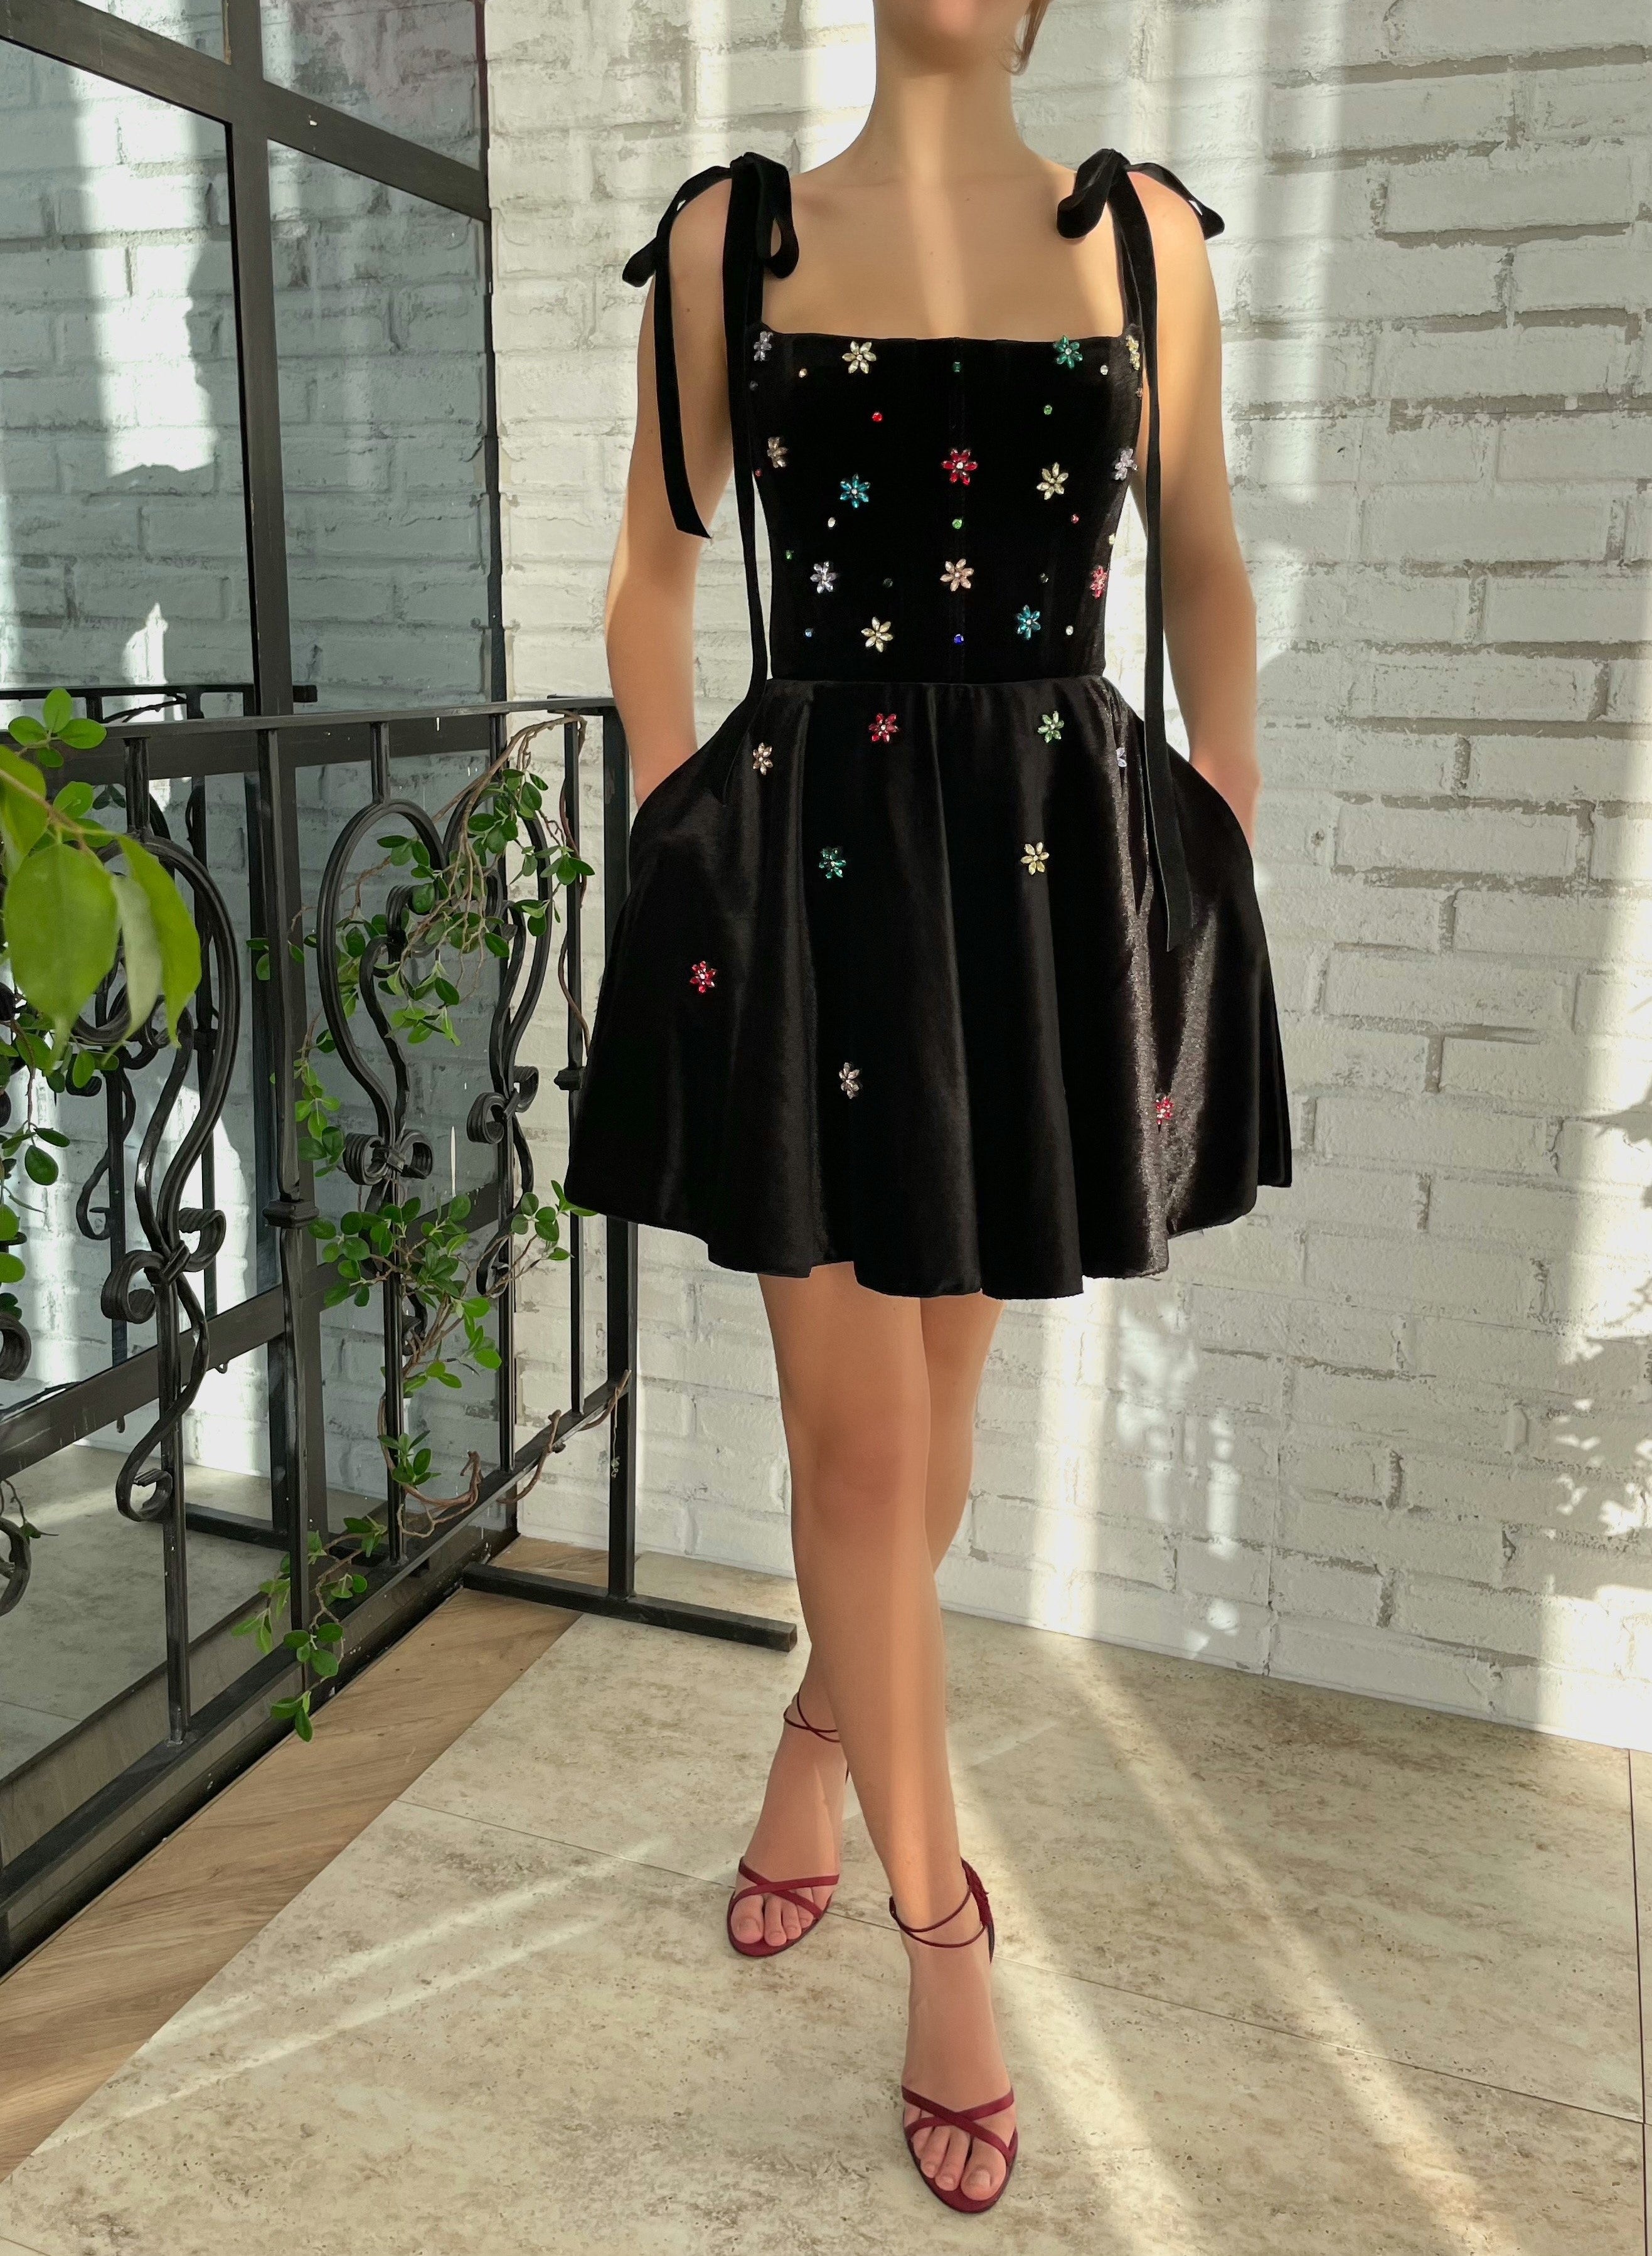 Black mini dress with bow straps and embroidery